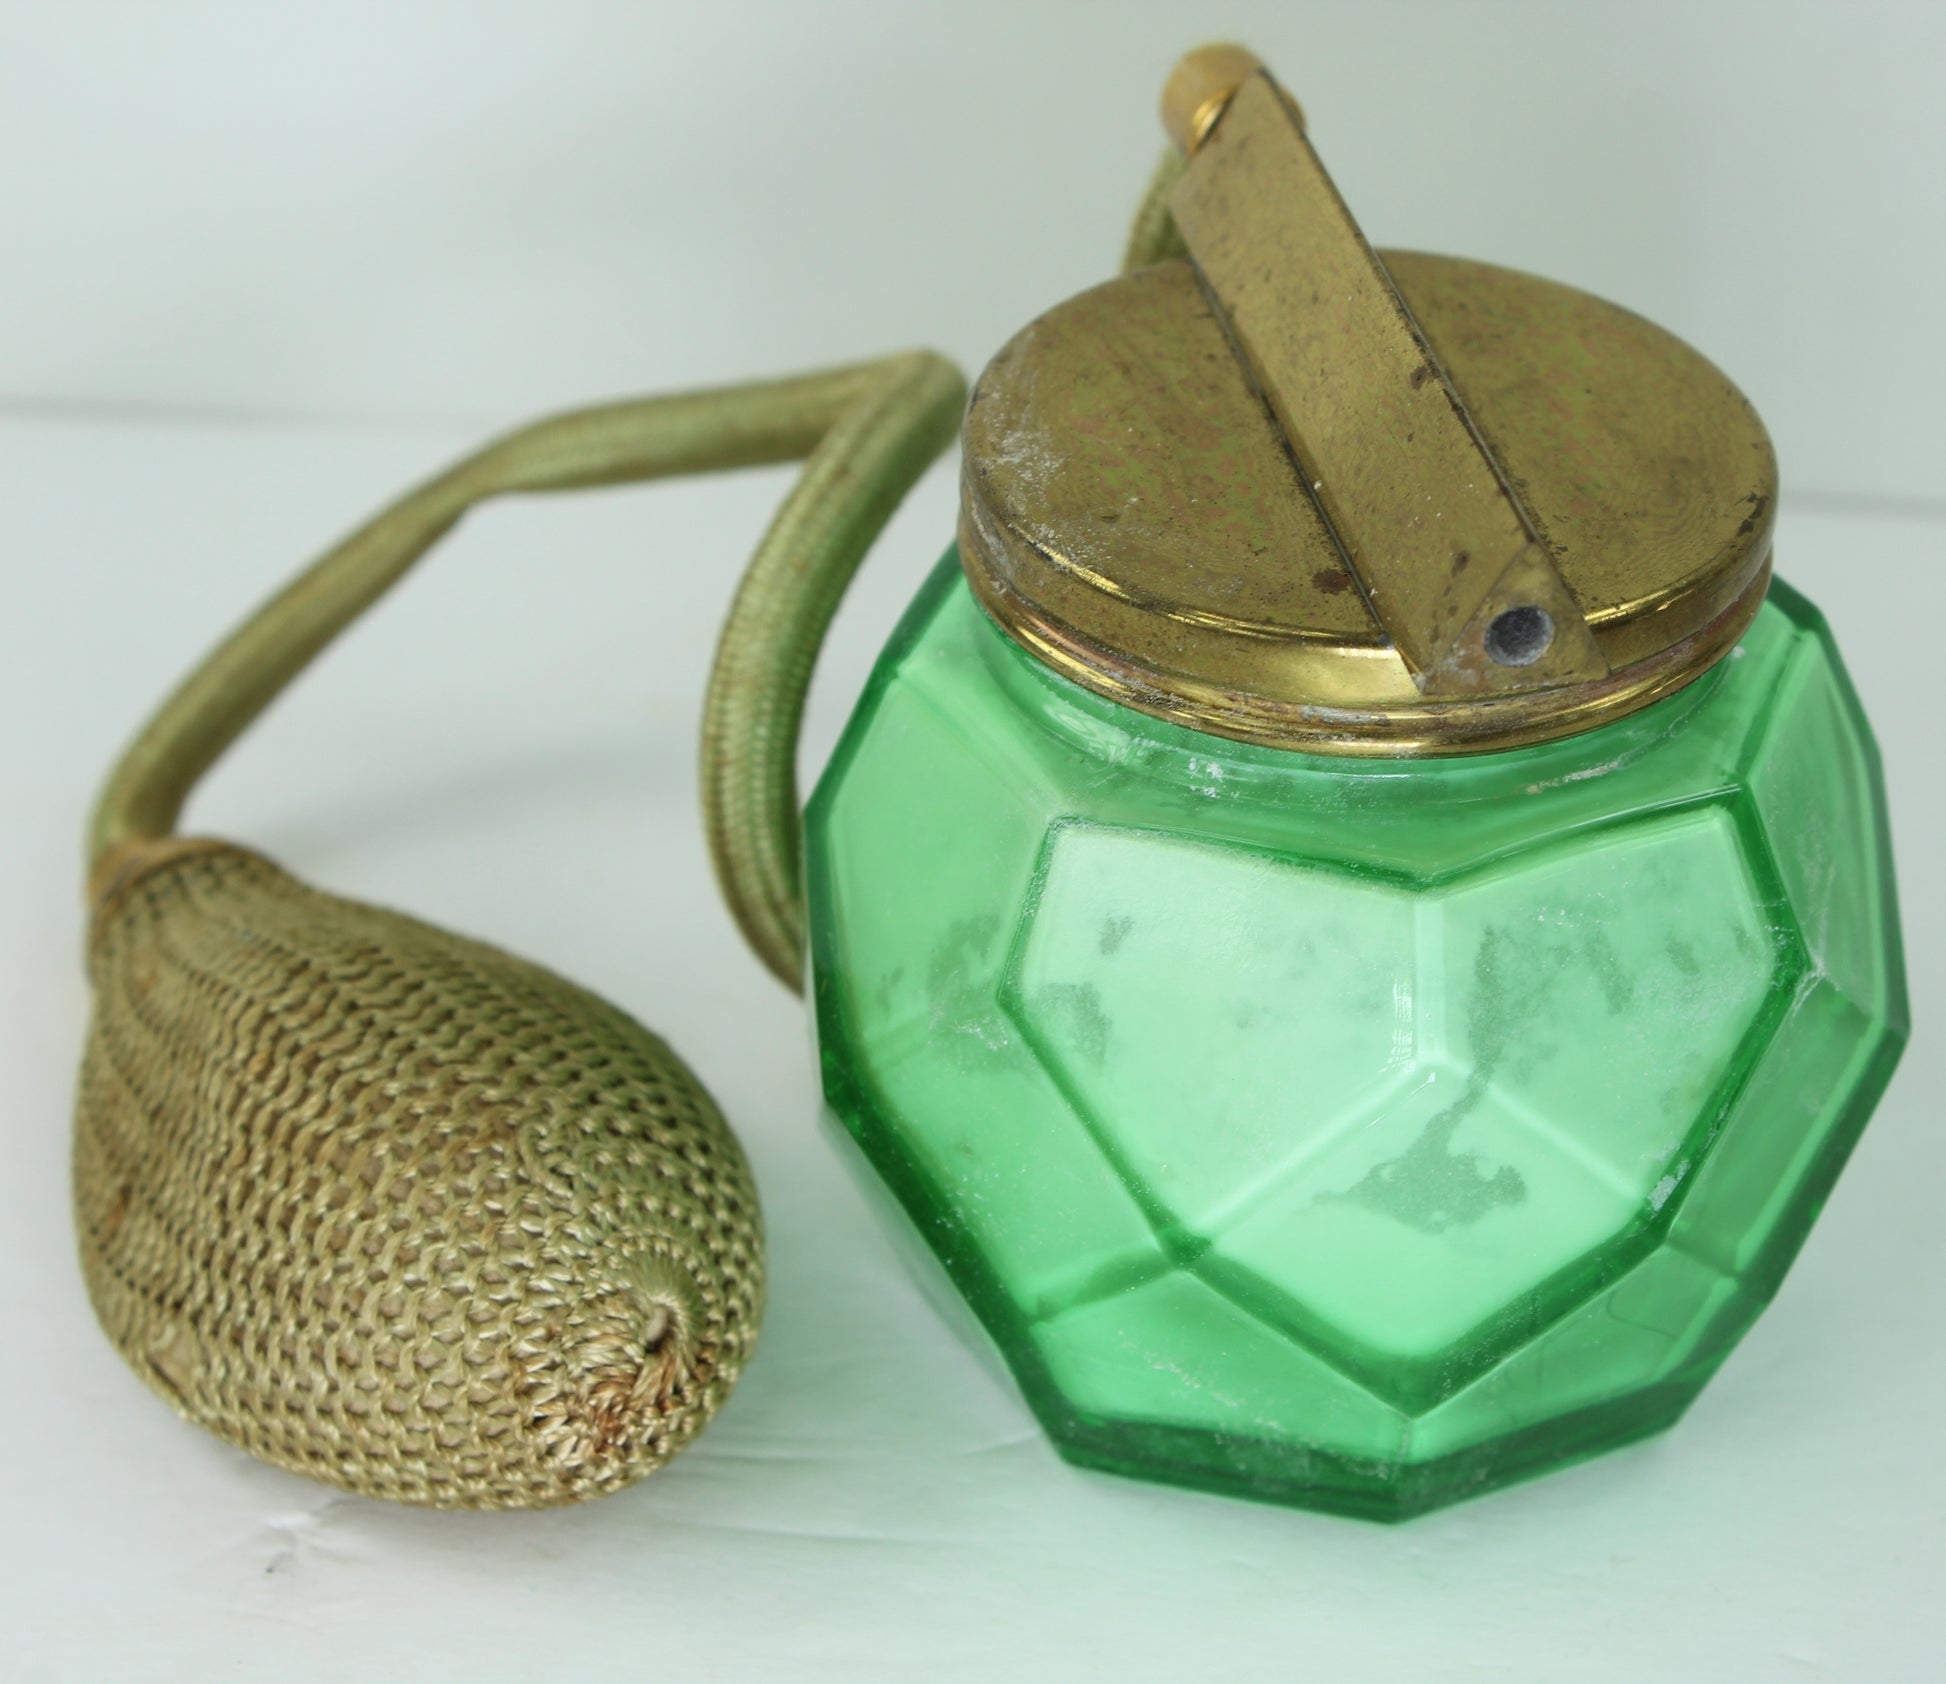 Extremely Rare Antique 1930s Volupte Spray Body Powder Atomizer Green Glass Powder Filled as arrived from estate of perfume collector